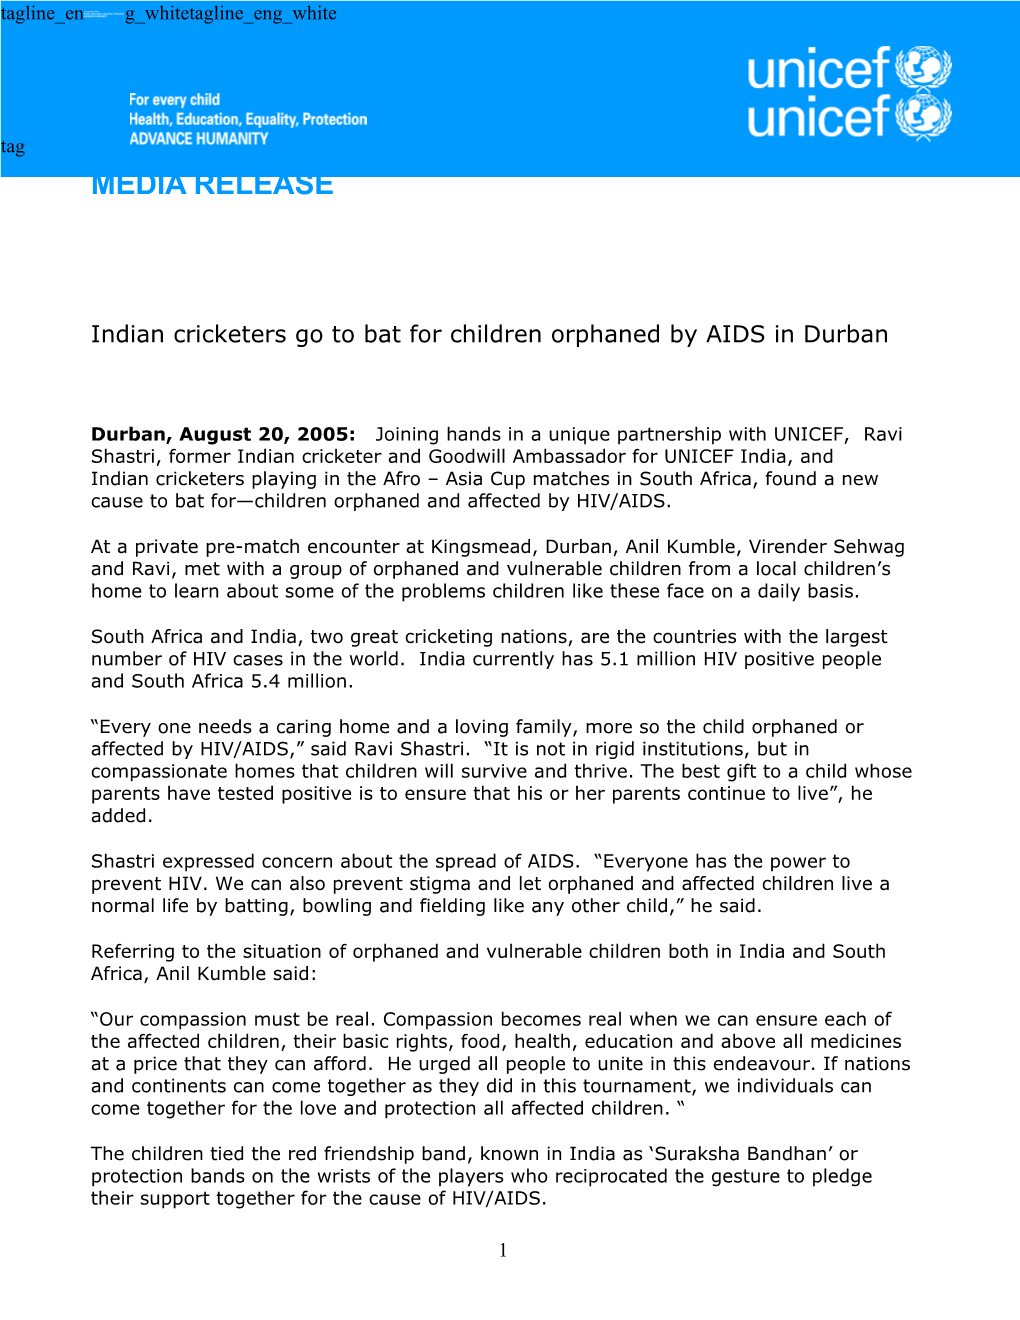 Indian Cricketers Go to Bat for Children Orphaned by AIDS in Durban